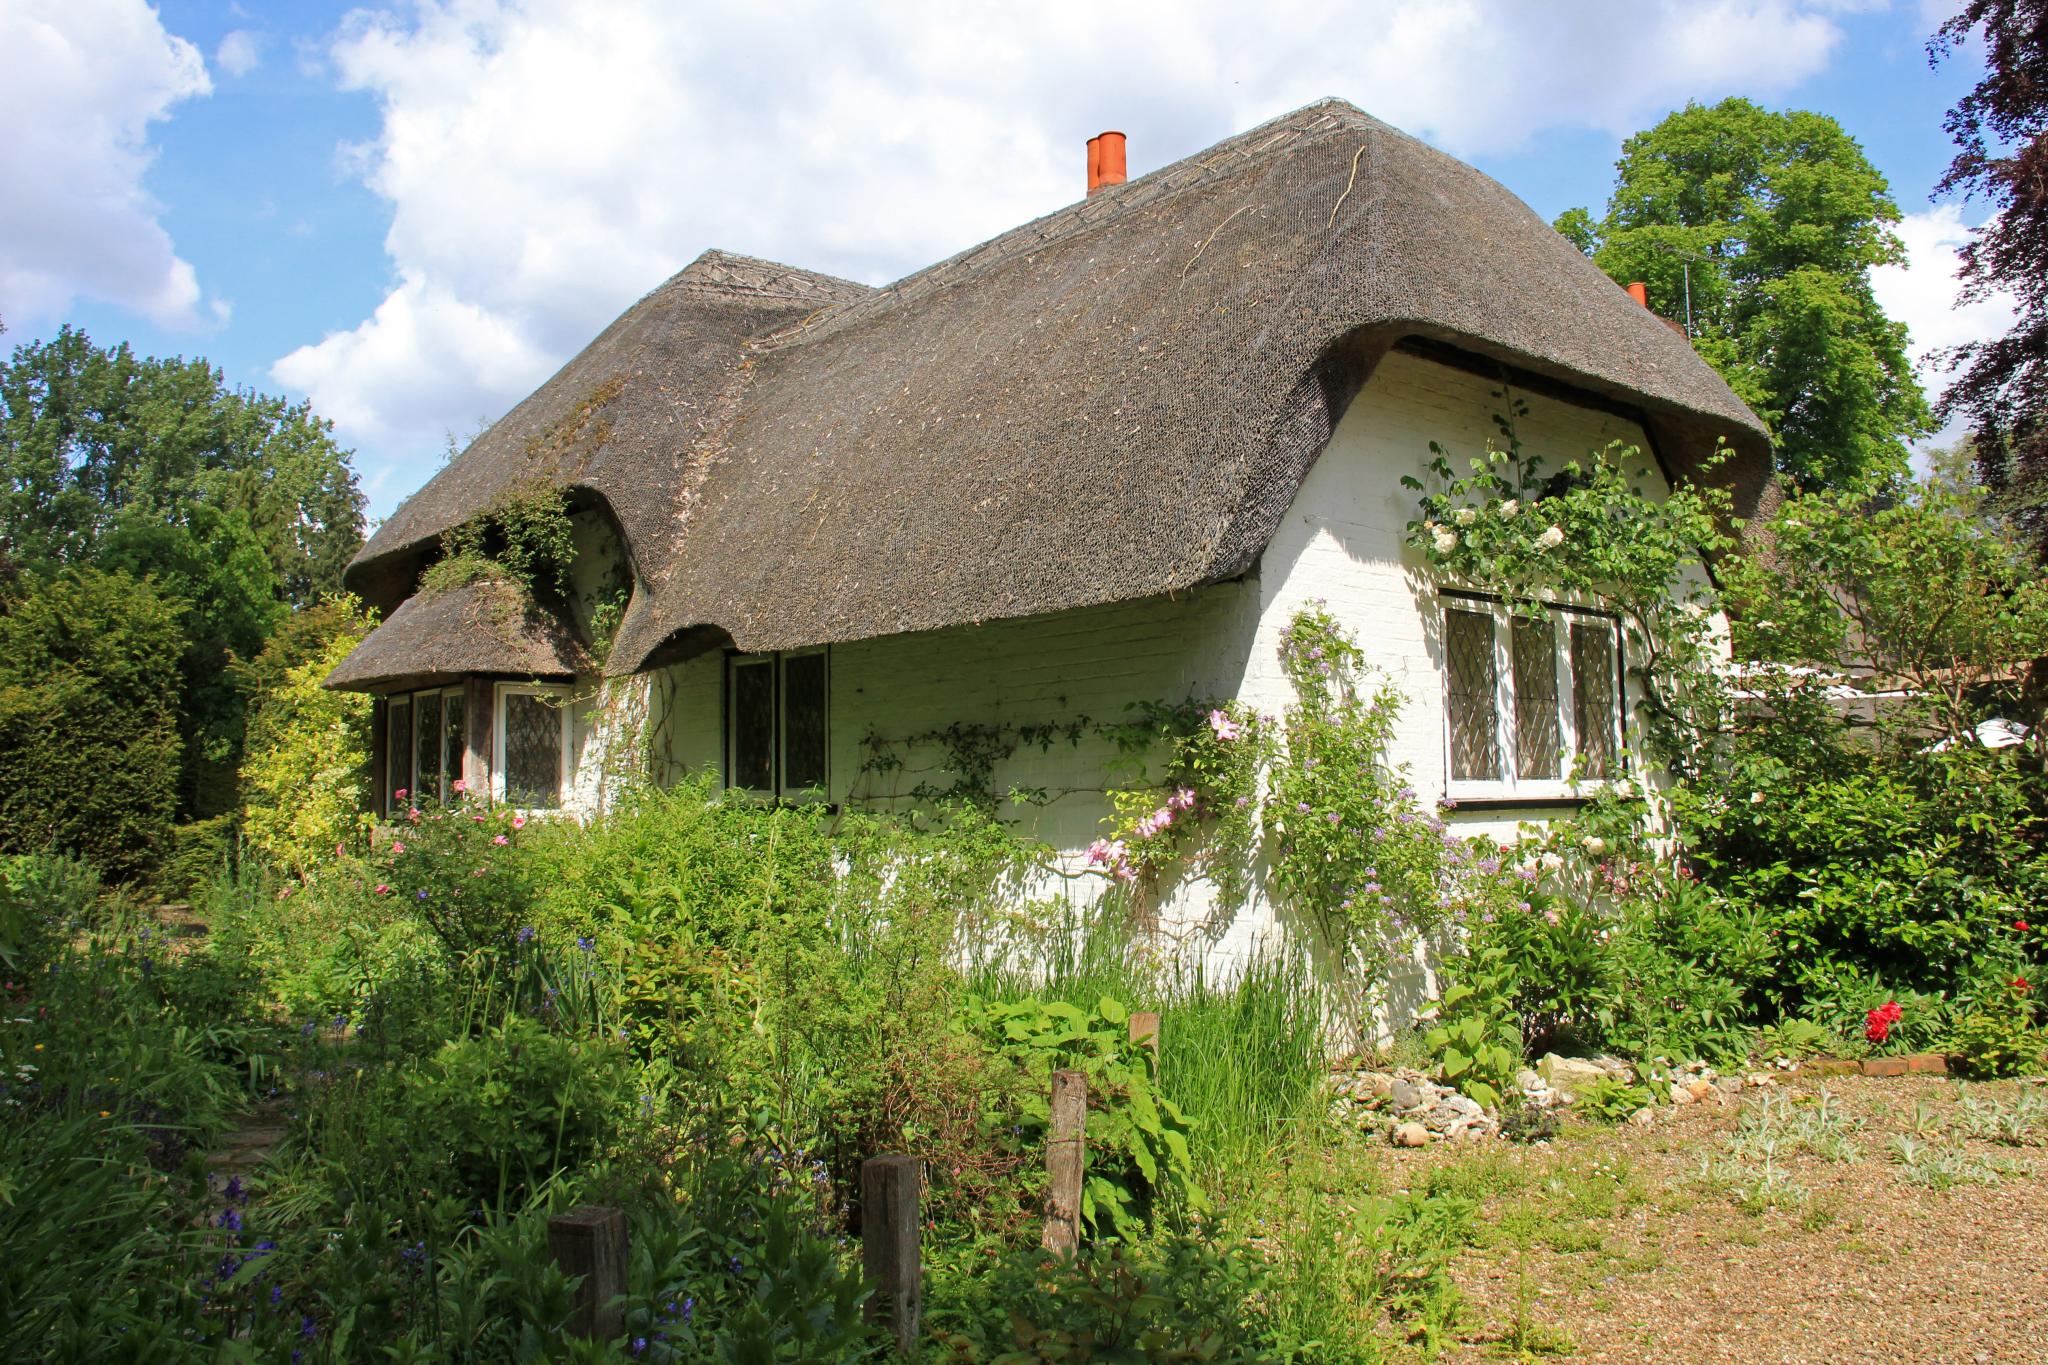 a thatched - roofed white cottage sits in the middle of bushes